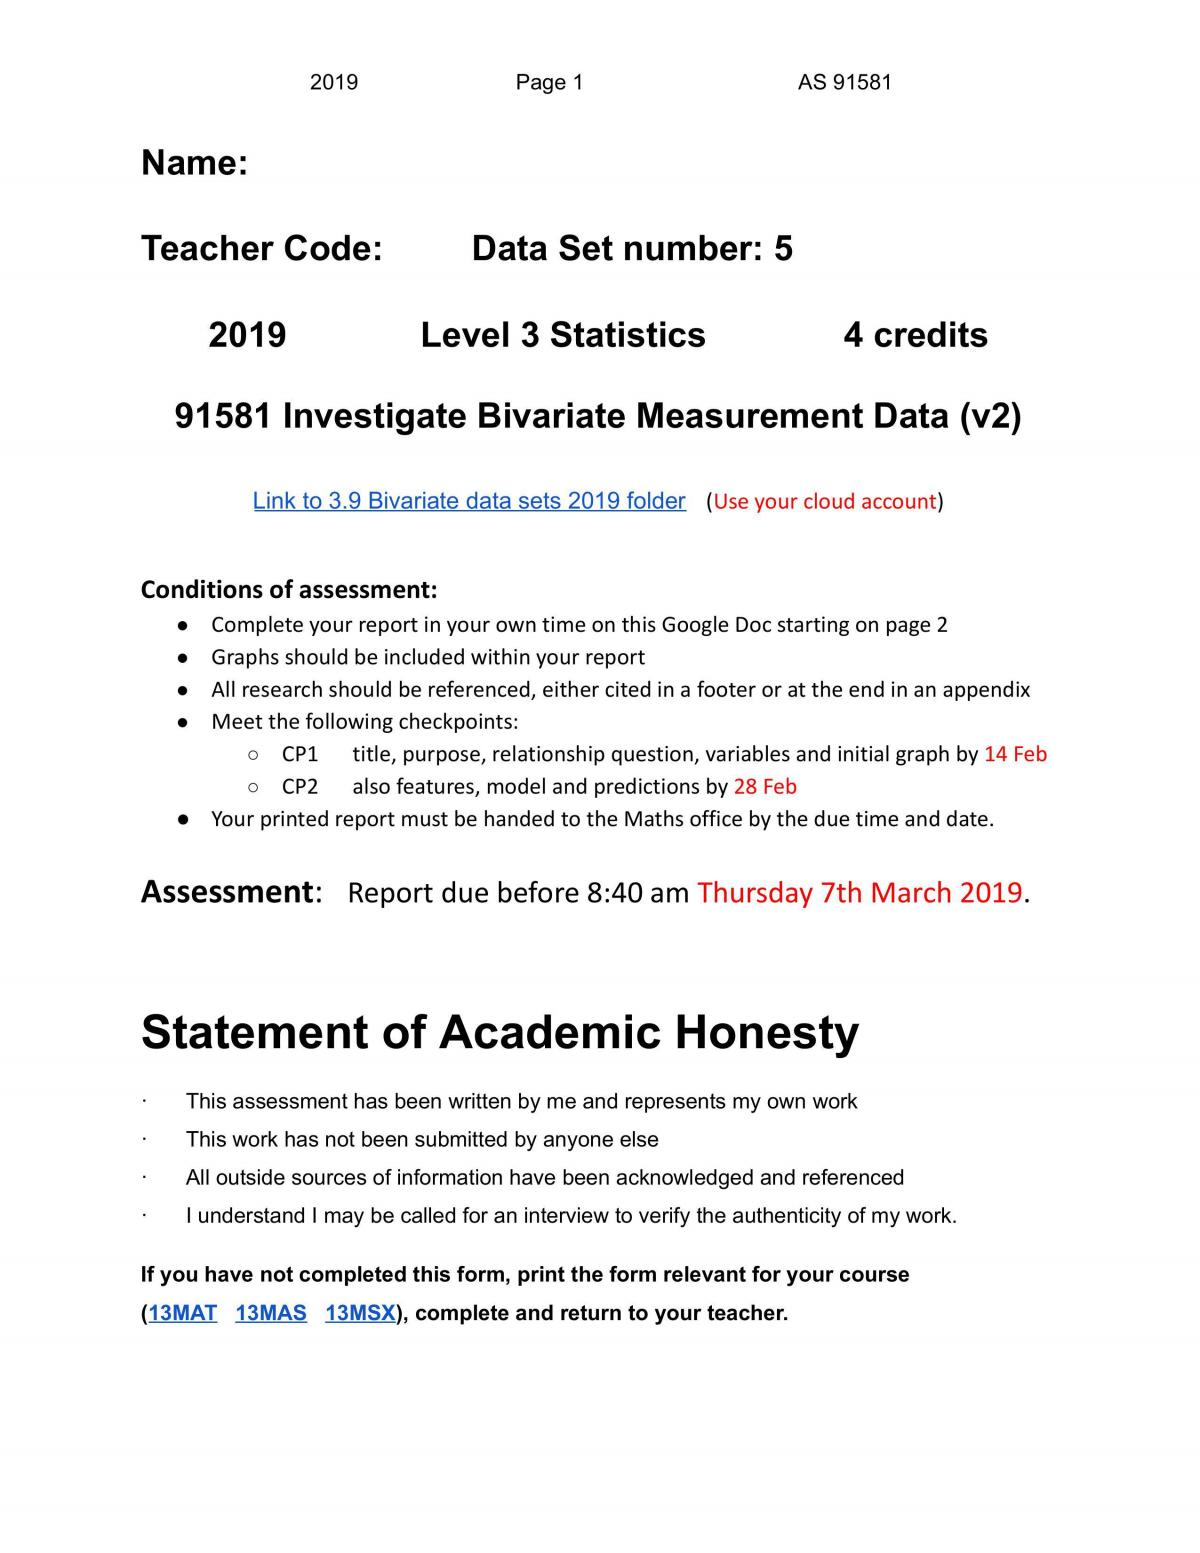 AS91581 Investigate Bivariate Measurement Data - Excellence example from scholarship student - Page 1